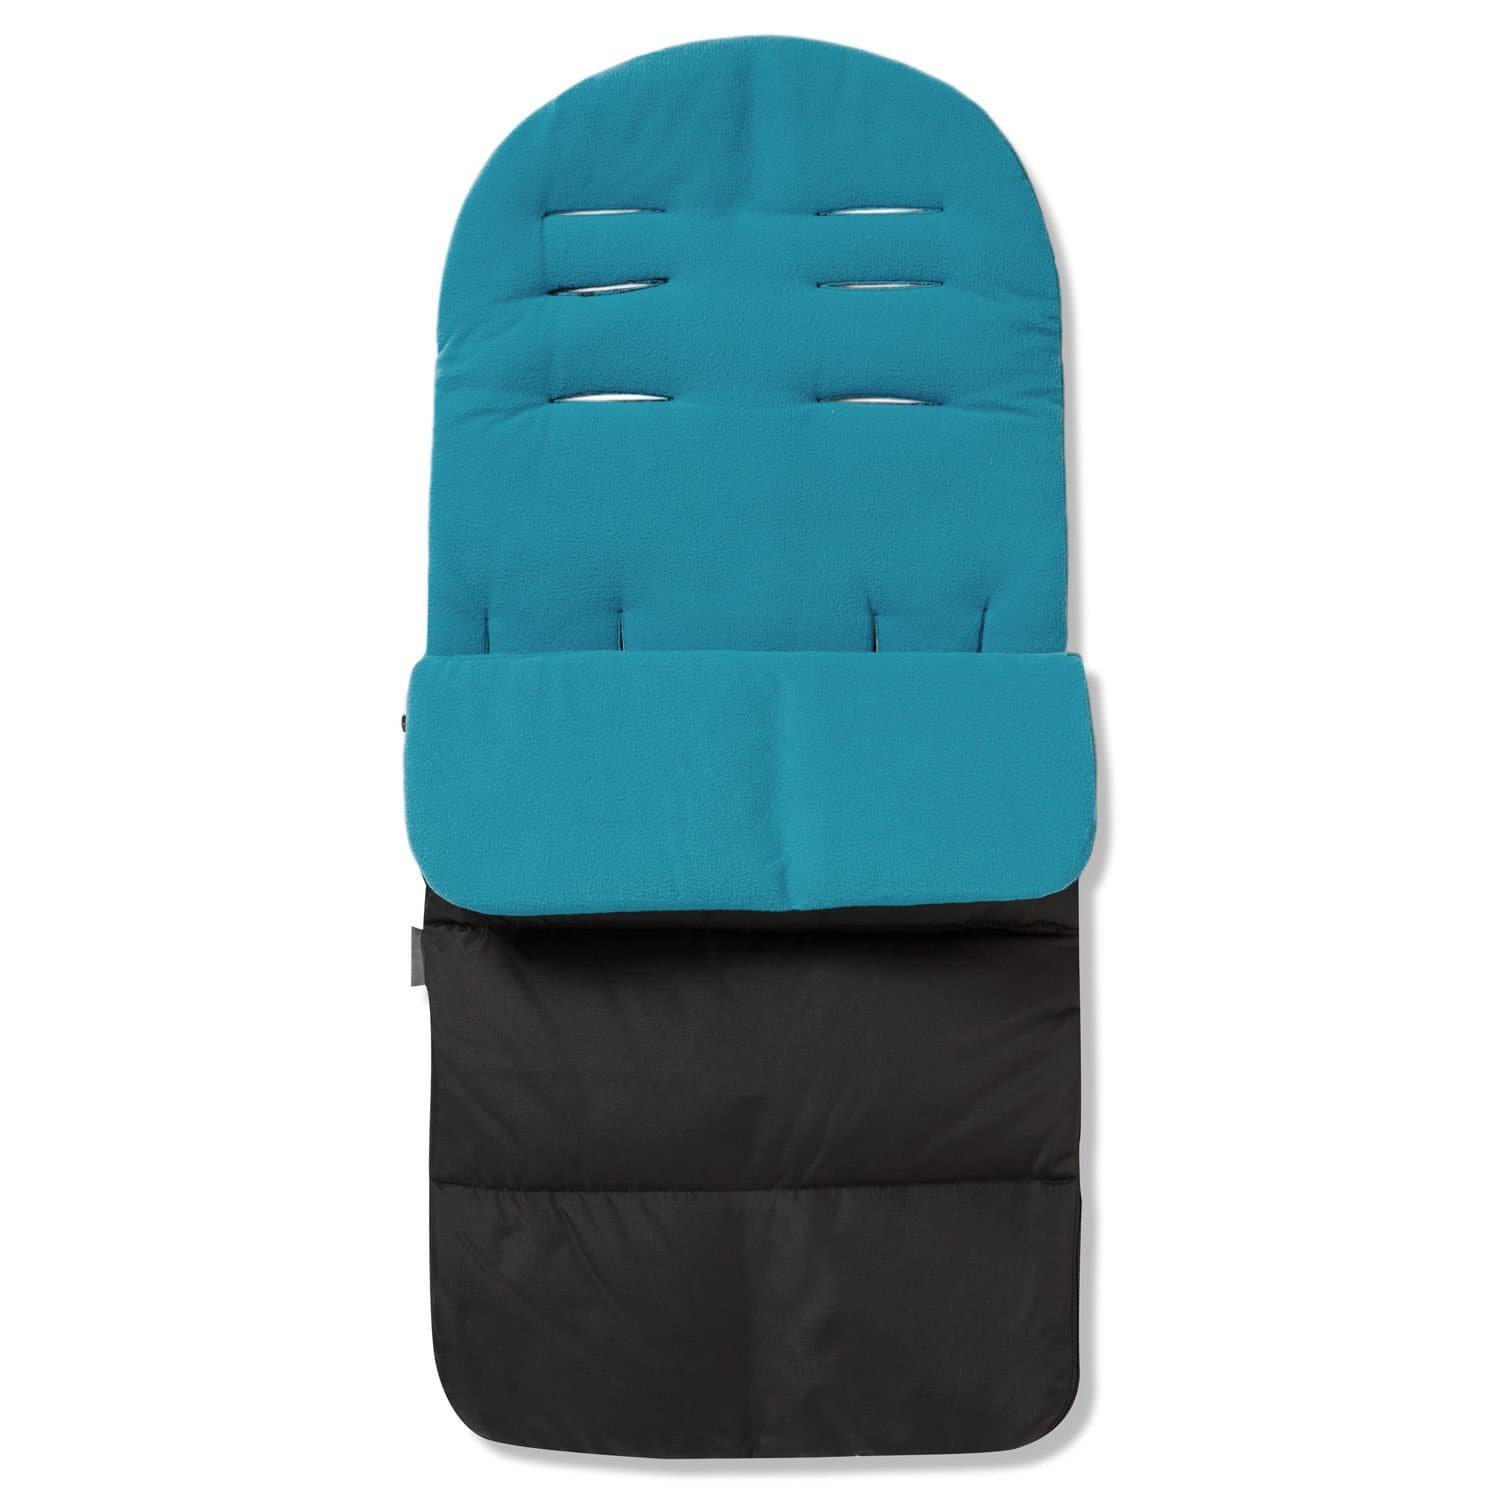 Premium Footmuff / Cosy Toes Compatible with Joolz - Ocean Blue / Fits All Models | For Your Little One